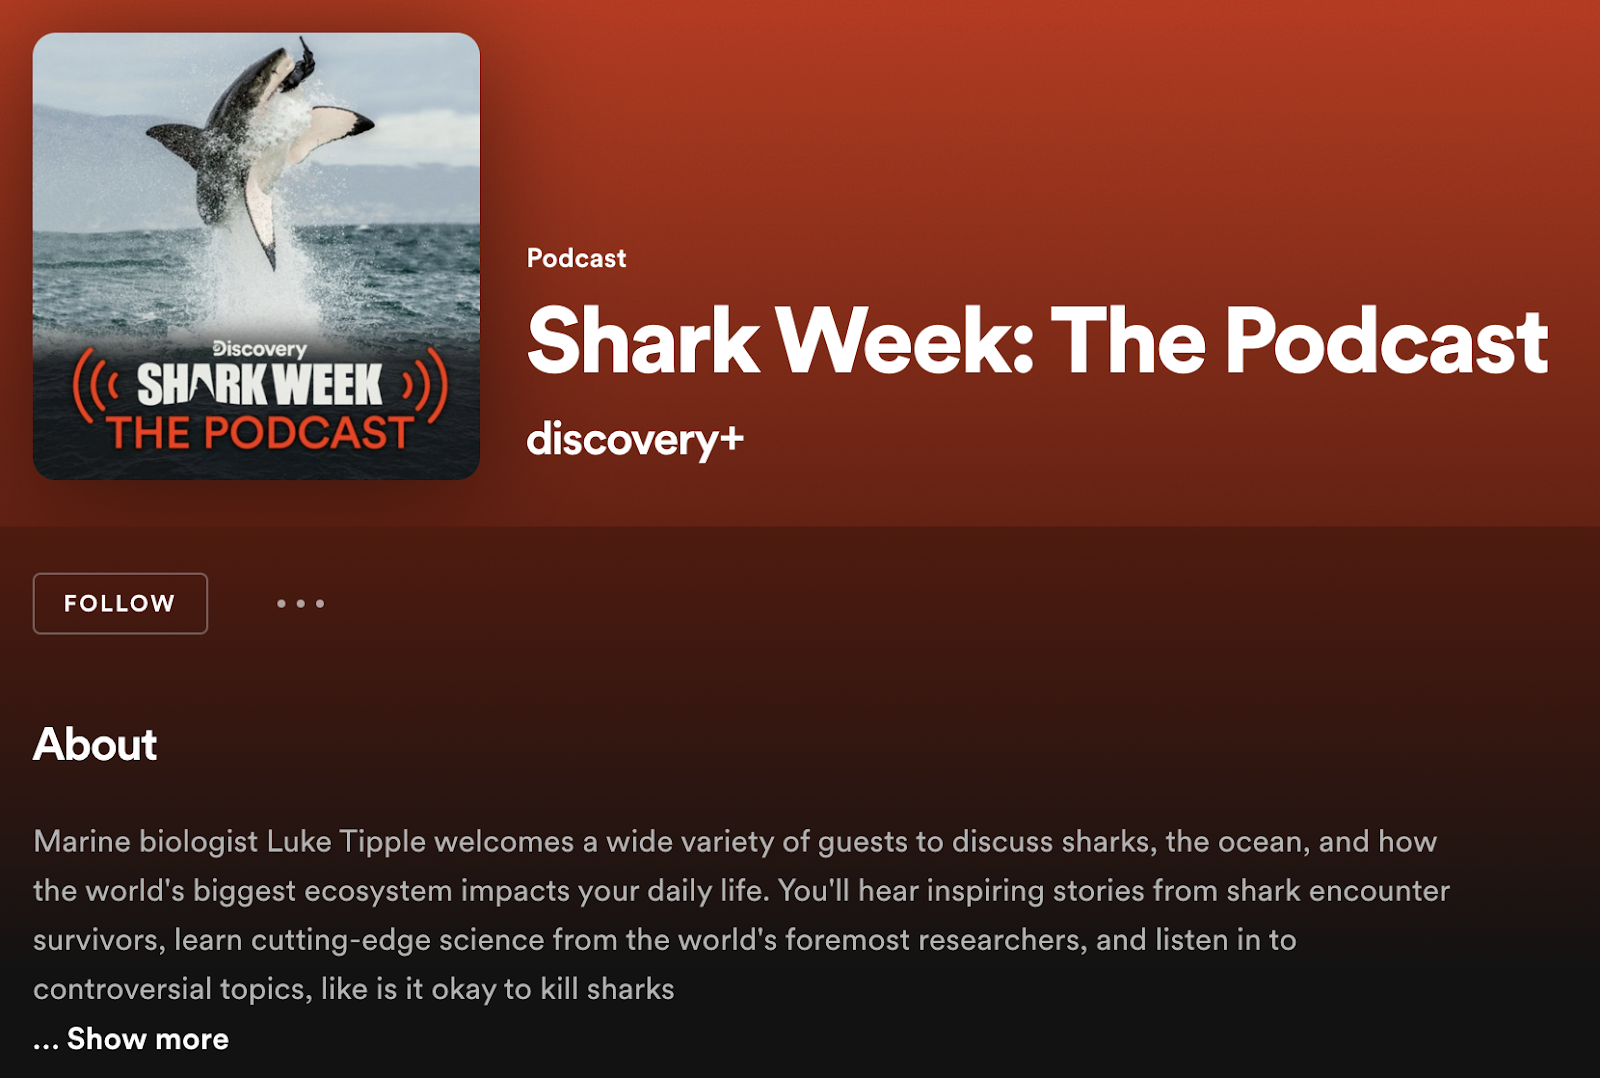 Discovery’s “Shark Week: The Podcast” page